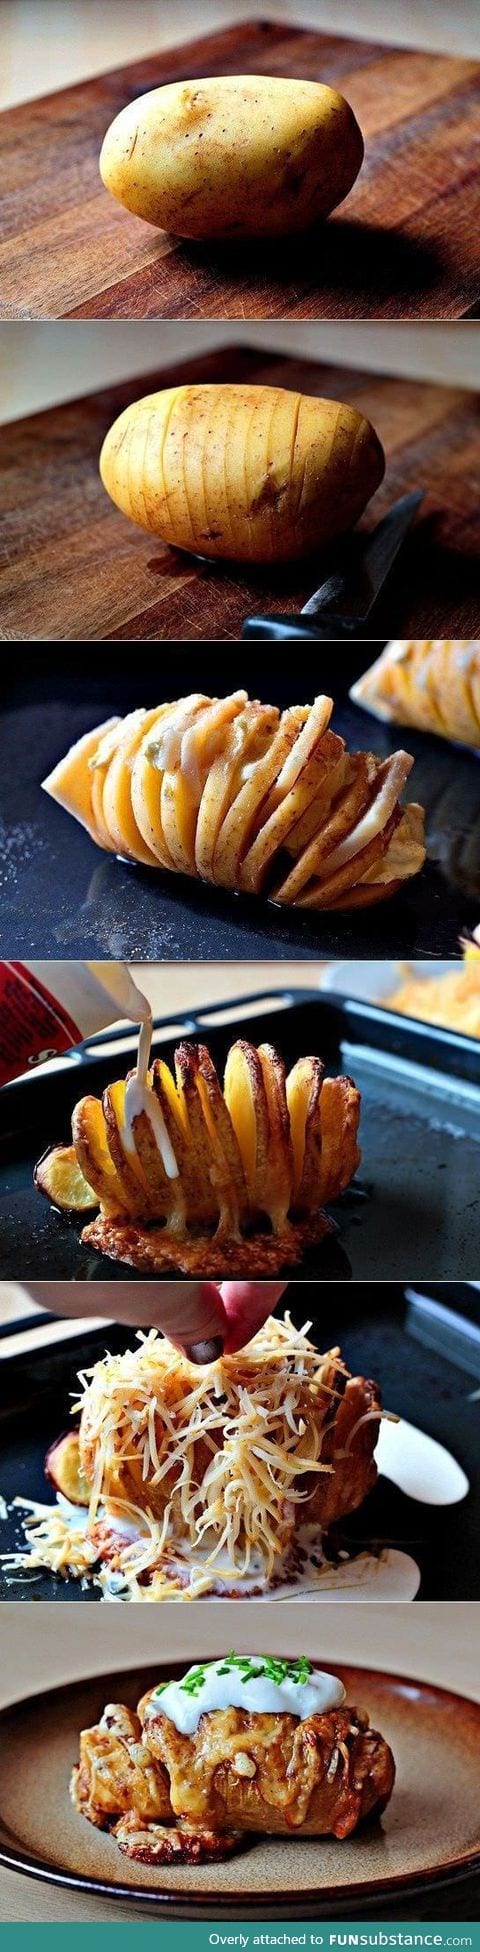 Here's an idea of how to make a baked potato